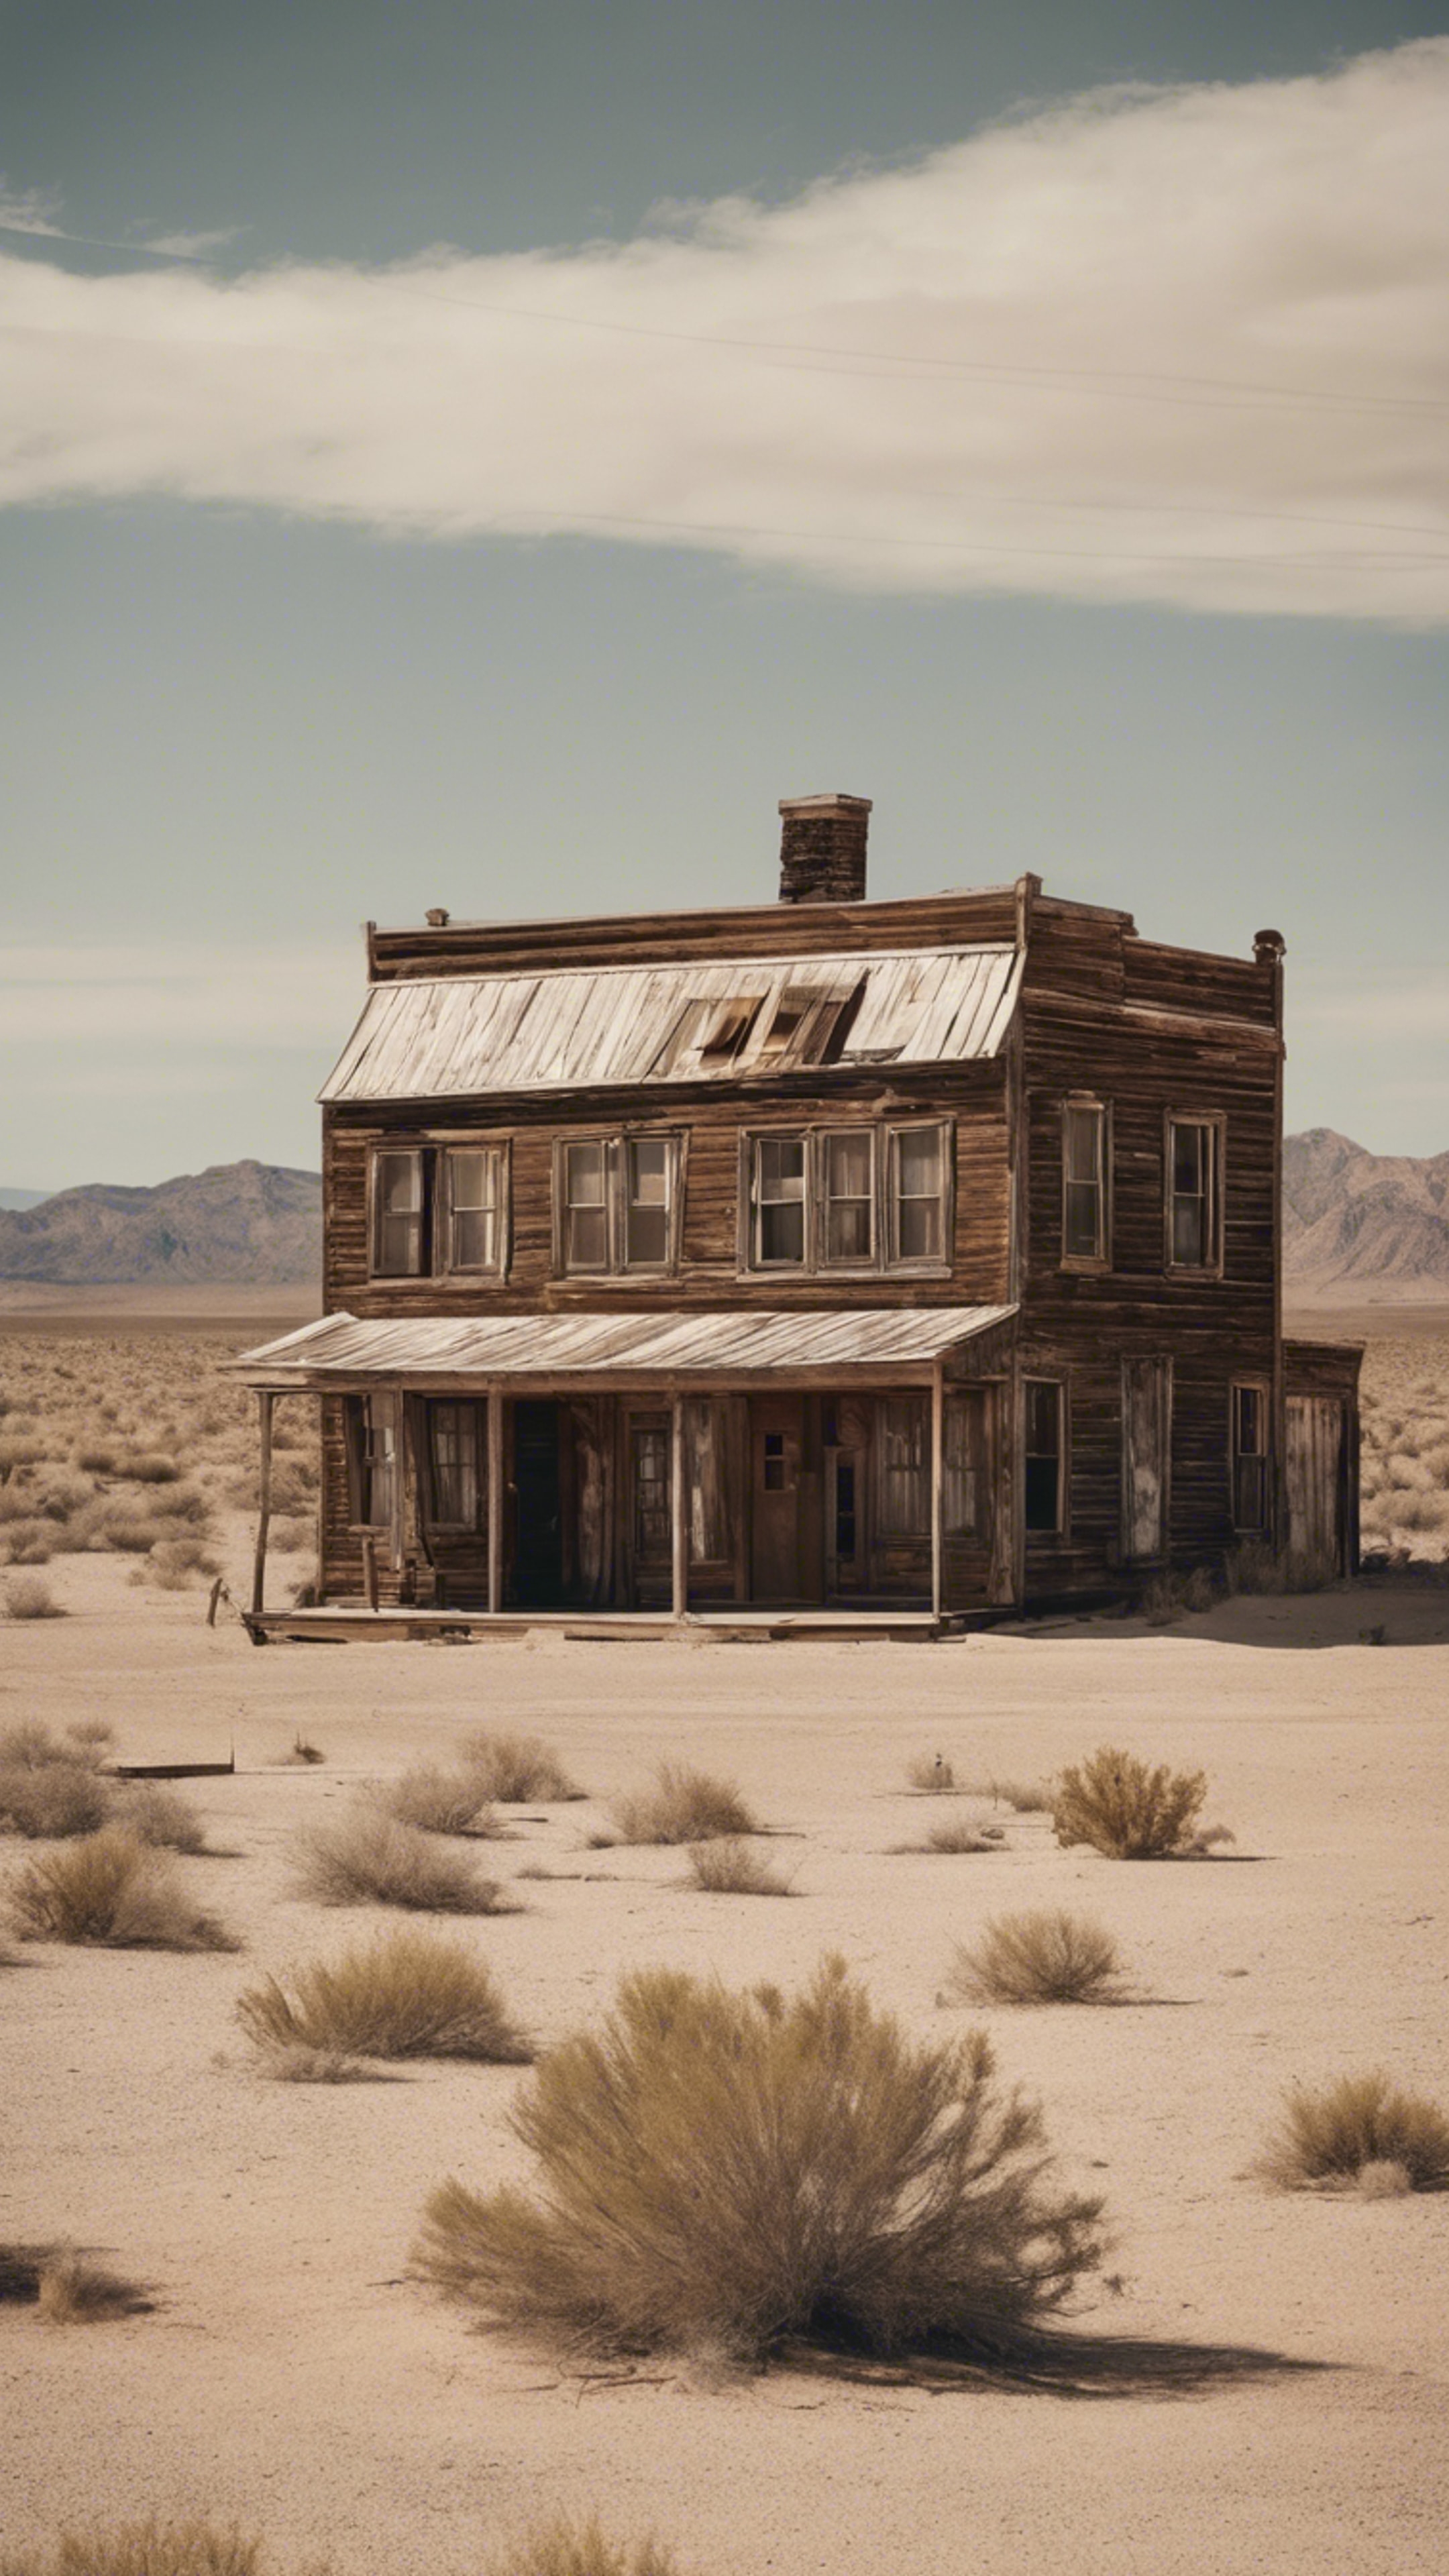 An old western ghost town located in the heart of an inhospitable sandy desert. Wallpaper[5d1c1c6d4731481194e6]